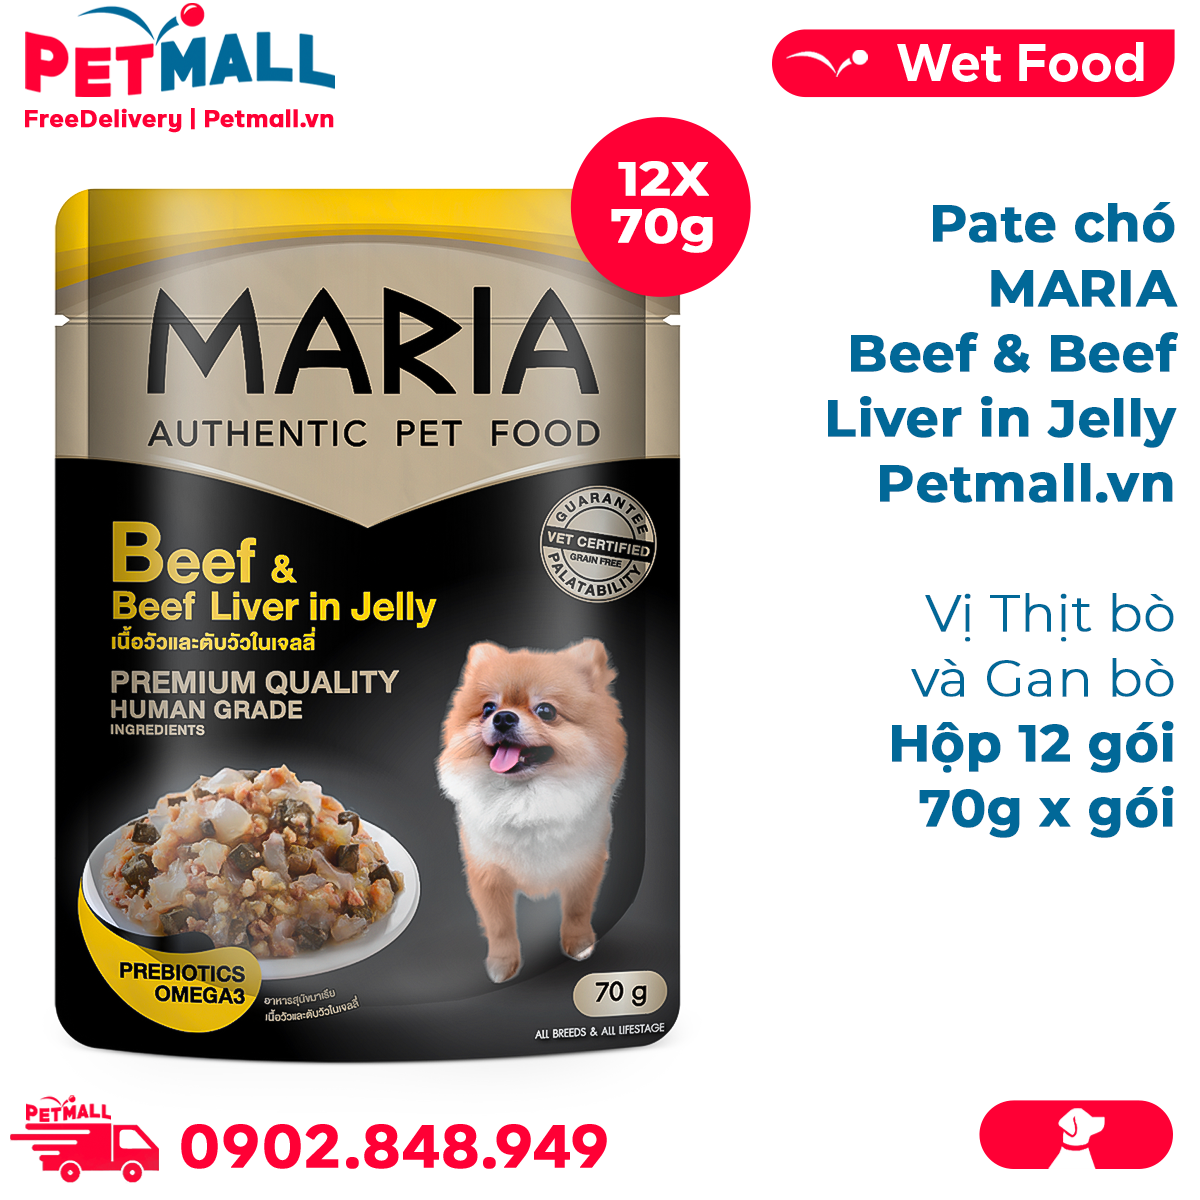 Pate chó MARIA Beef & Beef Liver in Jelly 70g - Hộp 12 gói